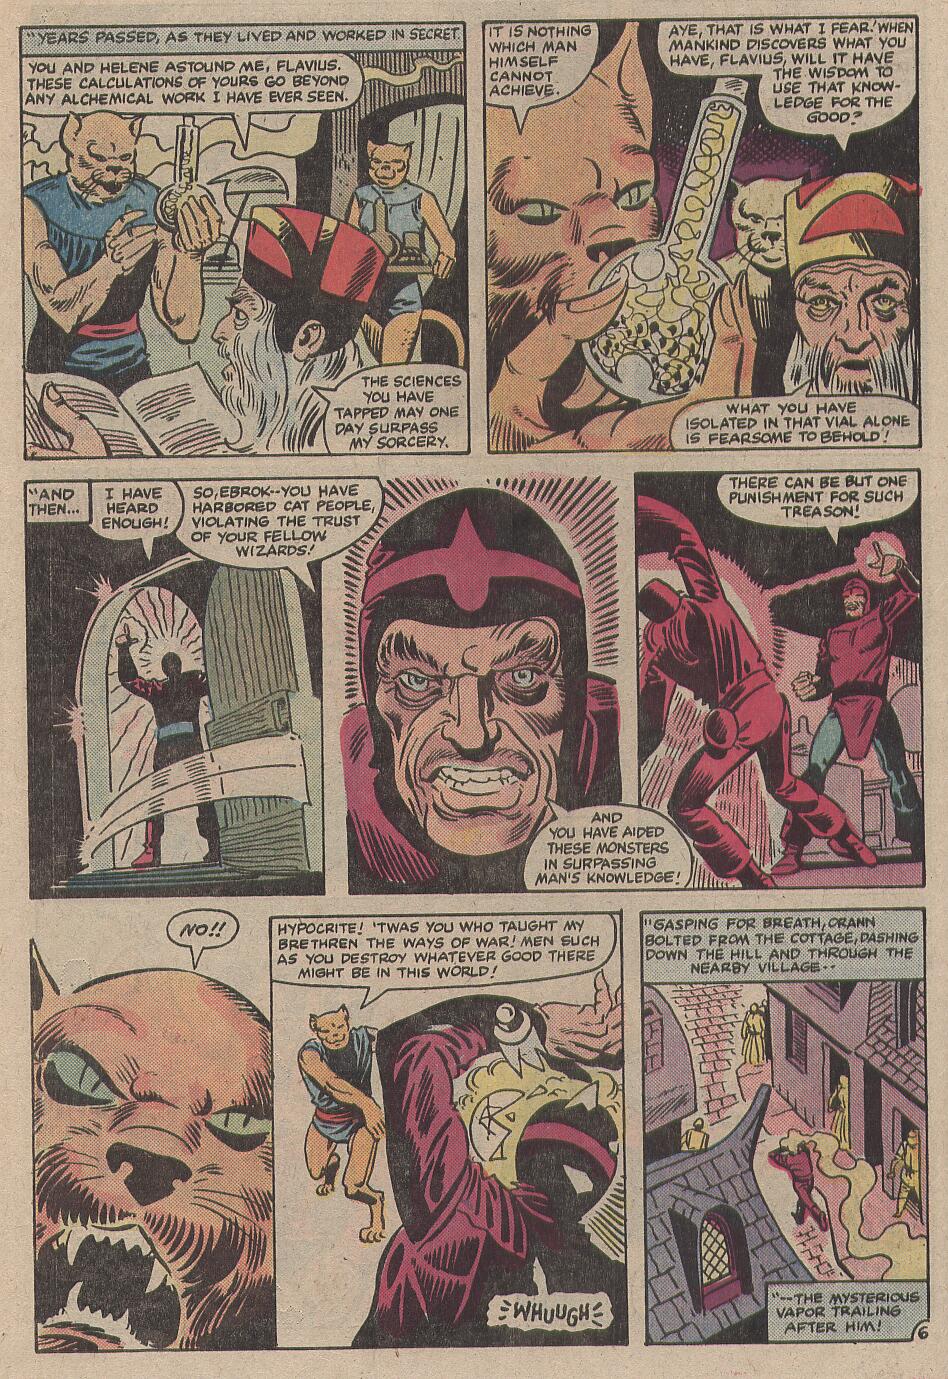 What If? (1977) issue 35 - Elektra had lived - Page 24